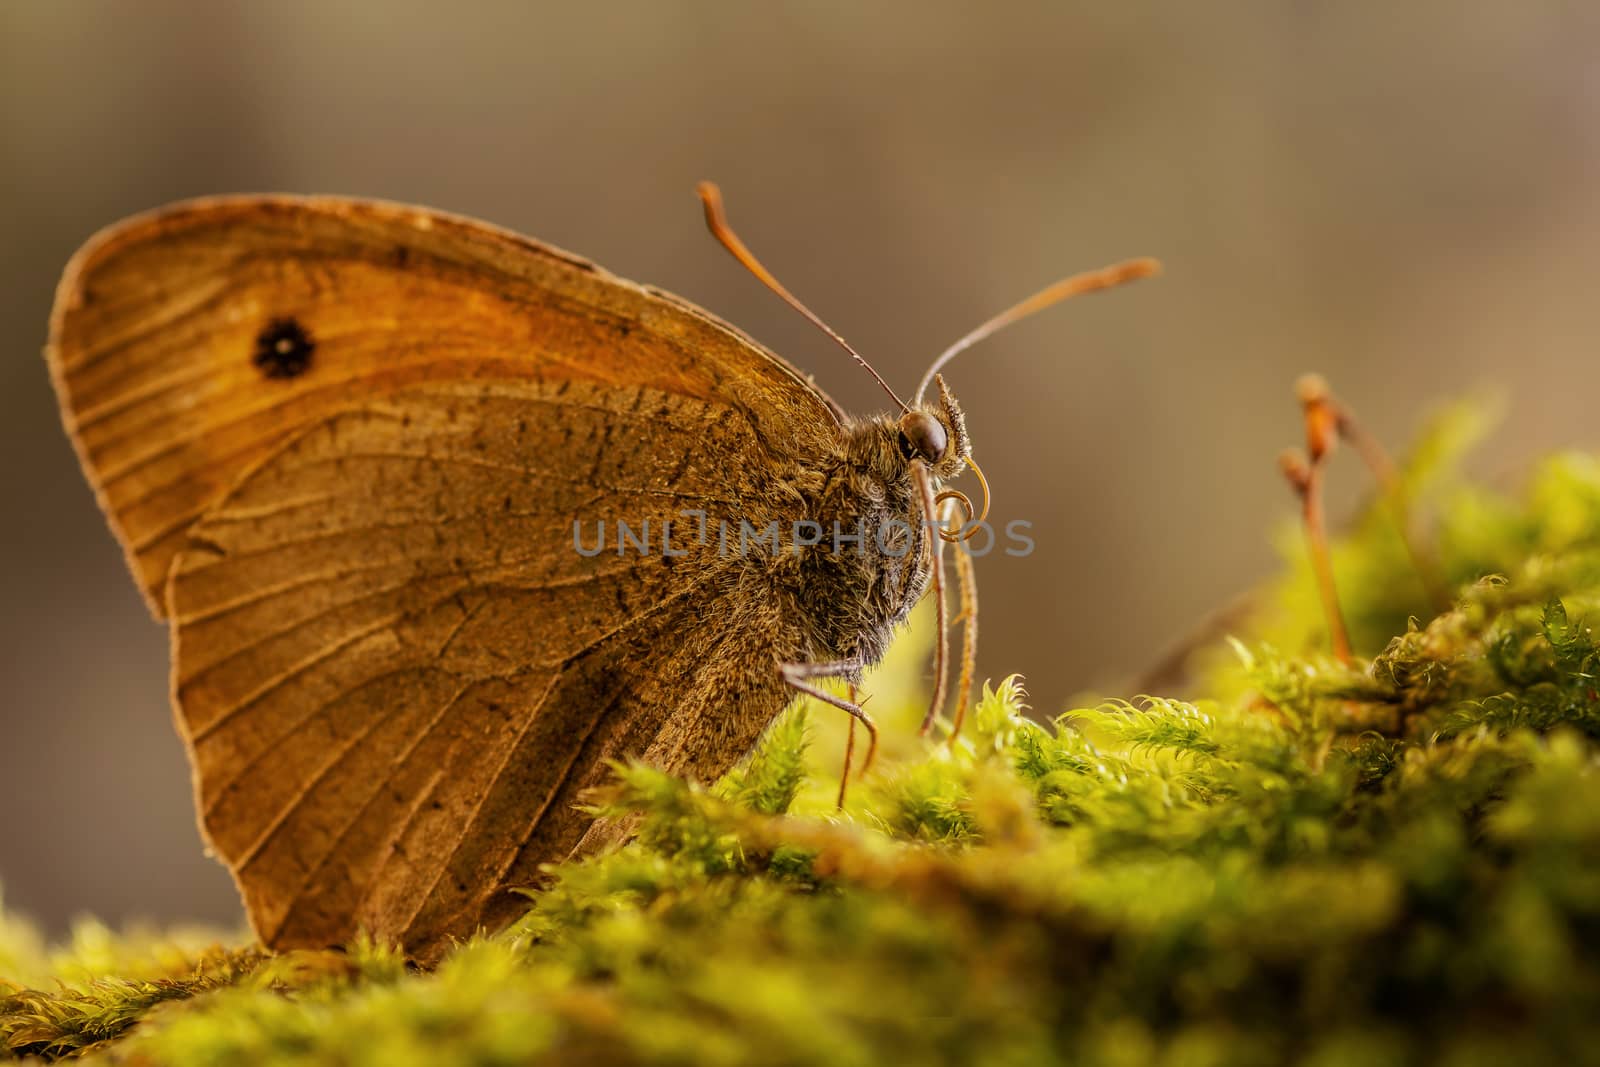 Butterfly standing on moss. Side view with blurred background.